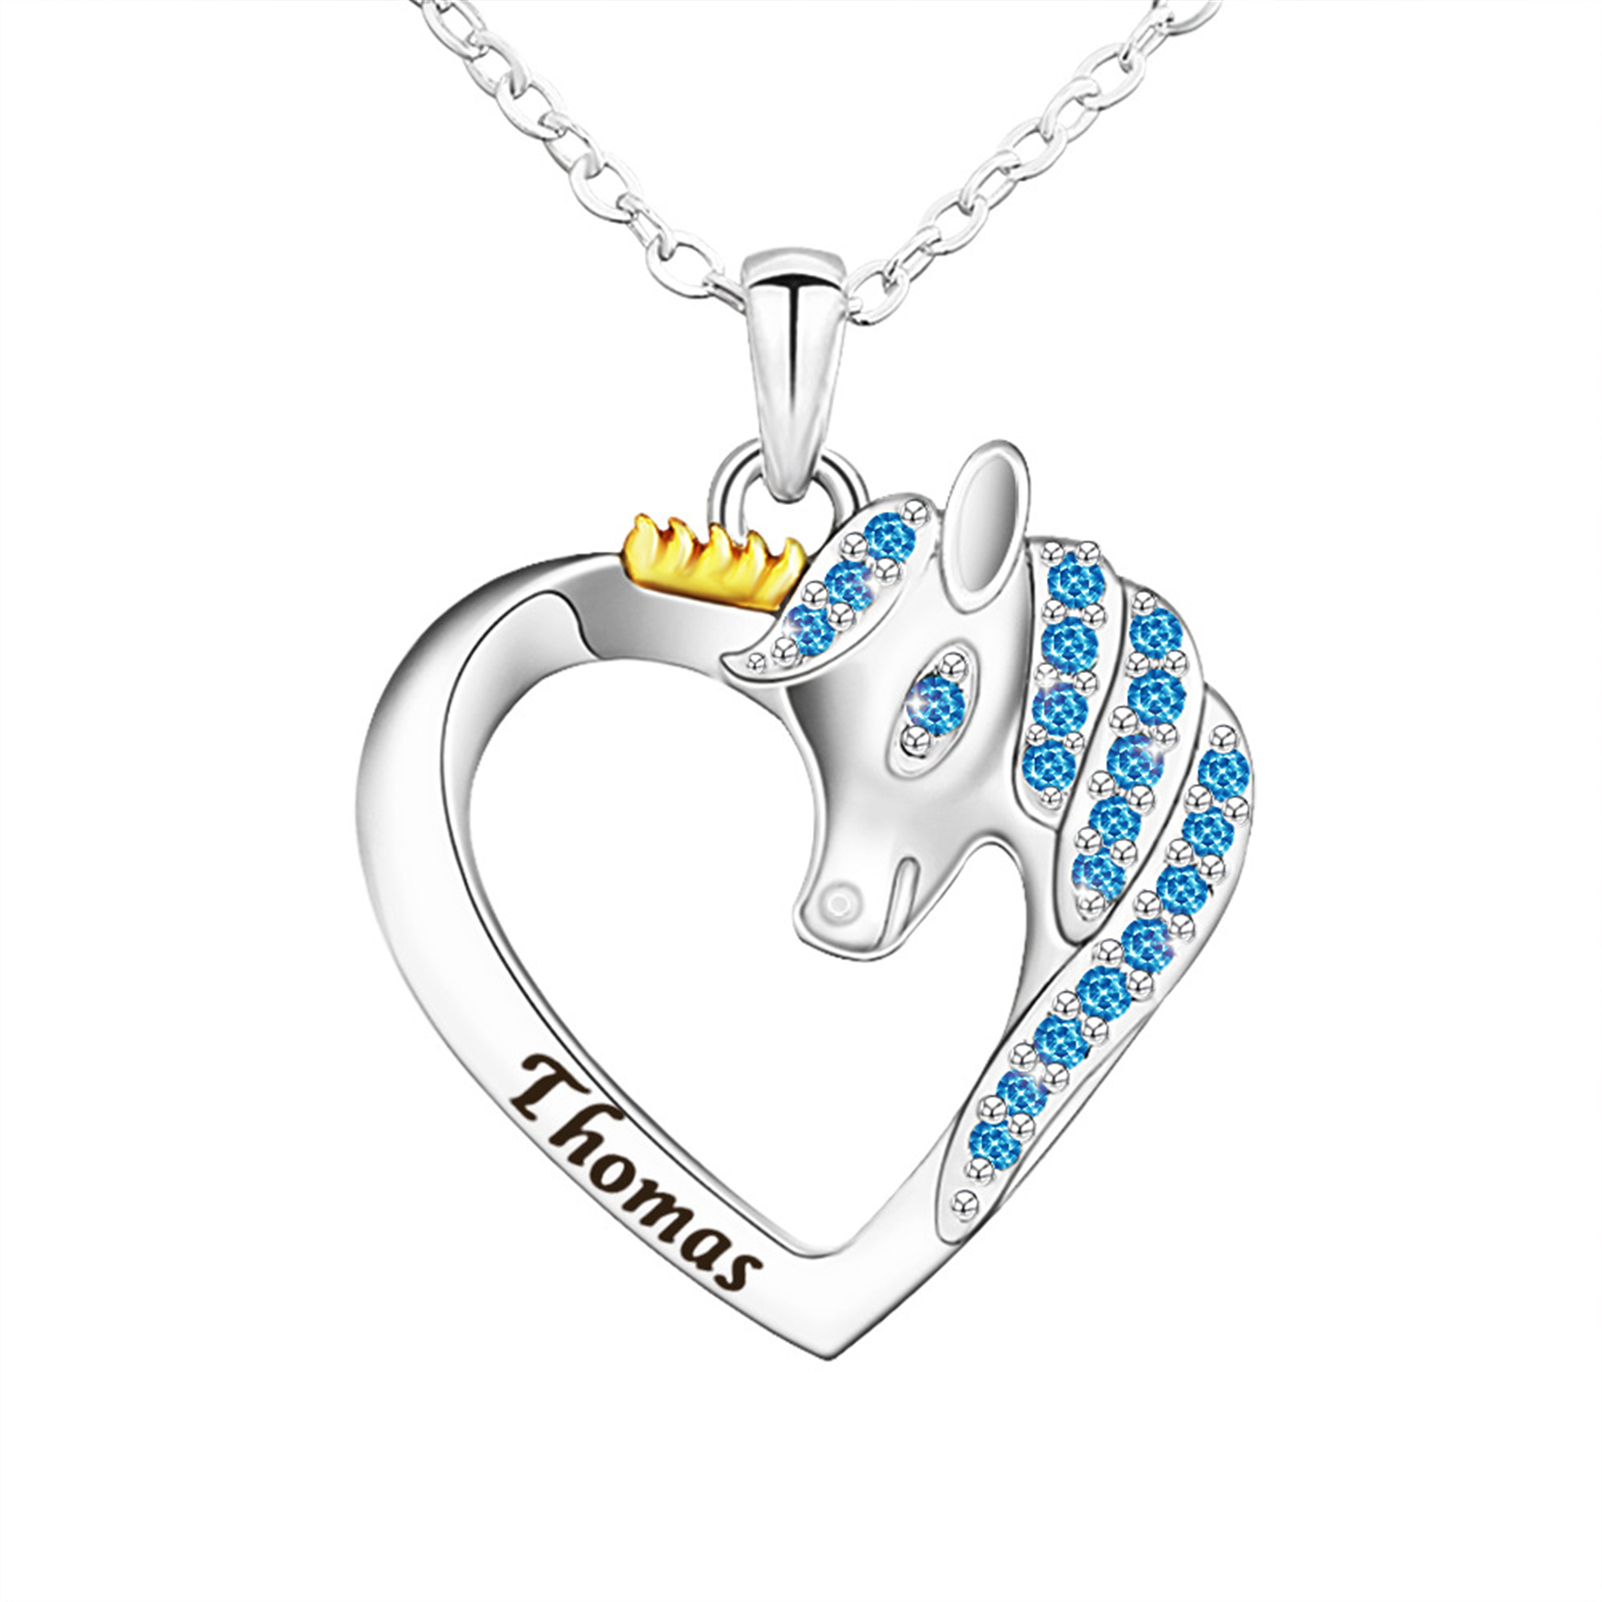 Personalized Heart Crystal Unicorn Necklace with  Free Engraved Name-YITUB